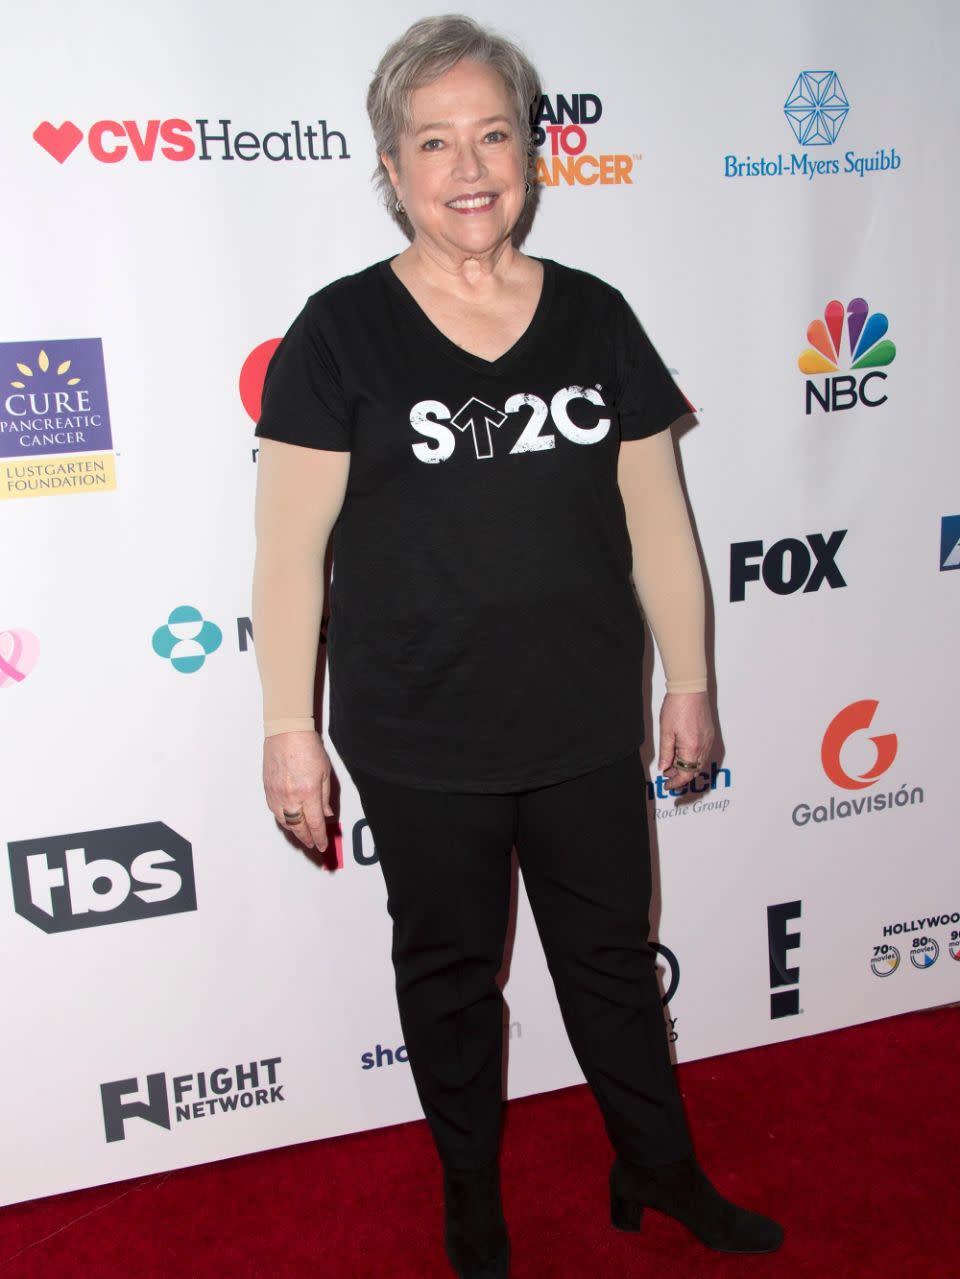 Kathy Bates is now a proud cancer survivor and advocate. Source: Getty